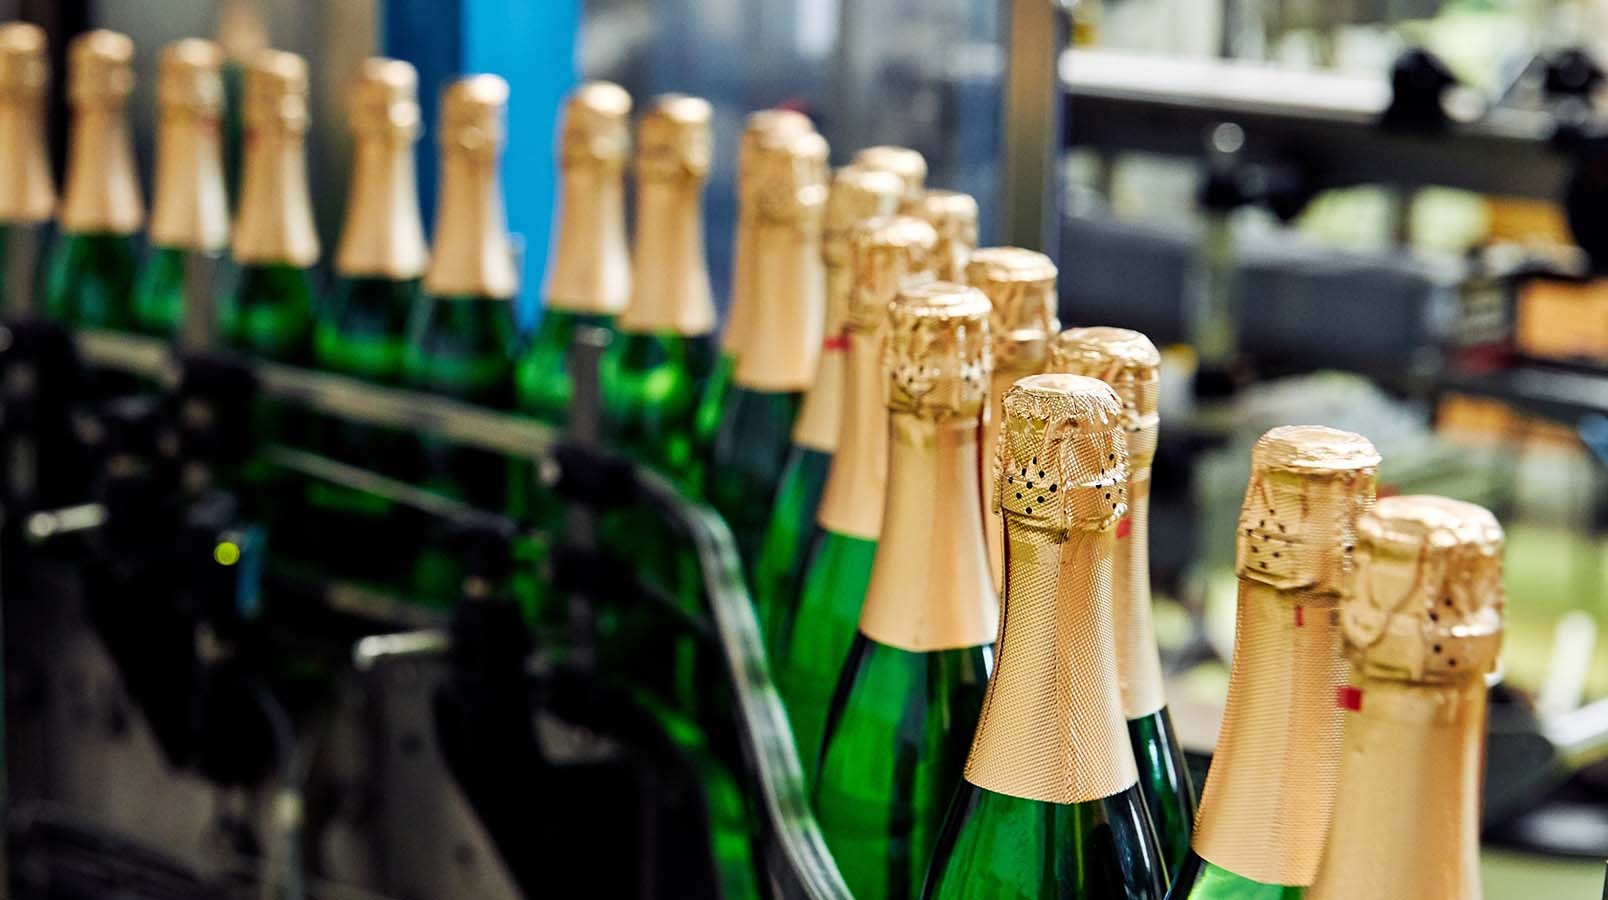 10 best sparkling wines and champagne for Christmas, Wine